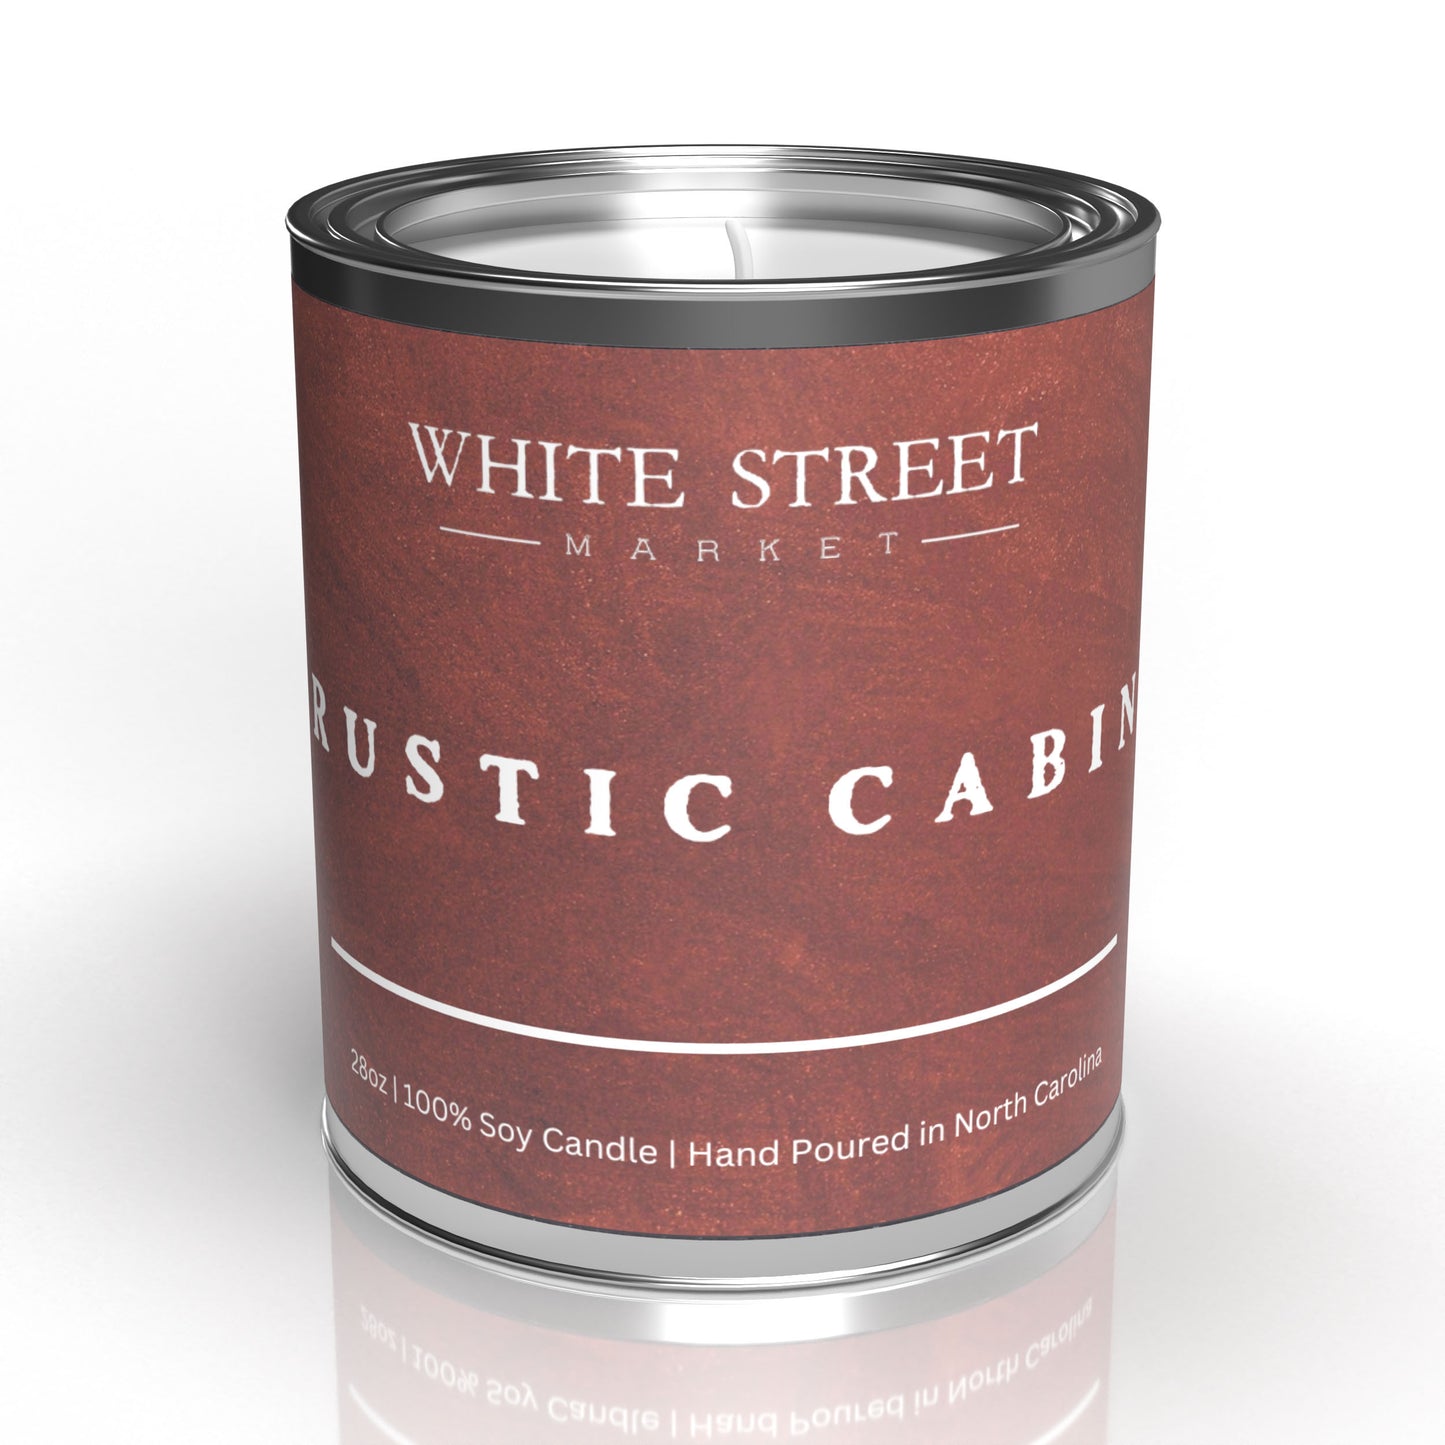 Rustic Cabin Candle - White Street Market